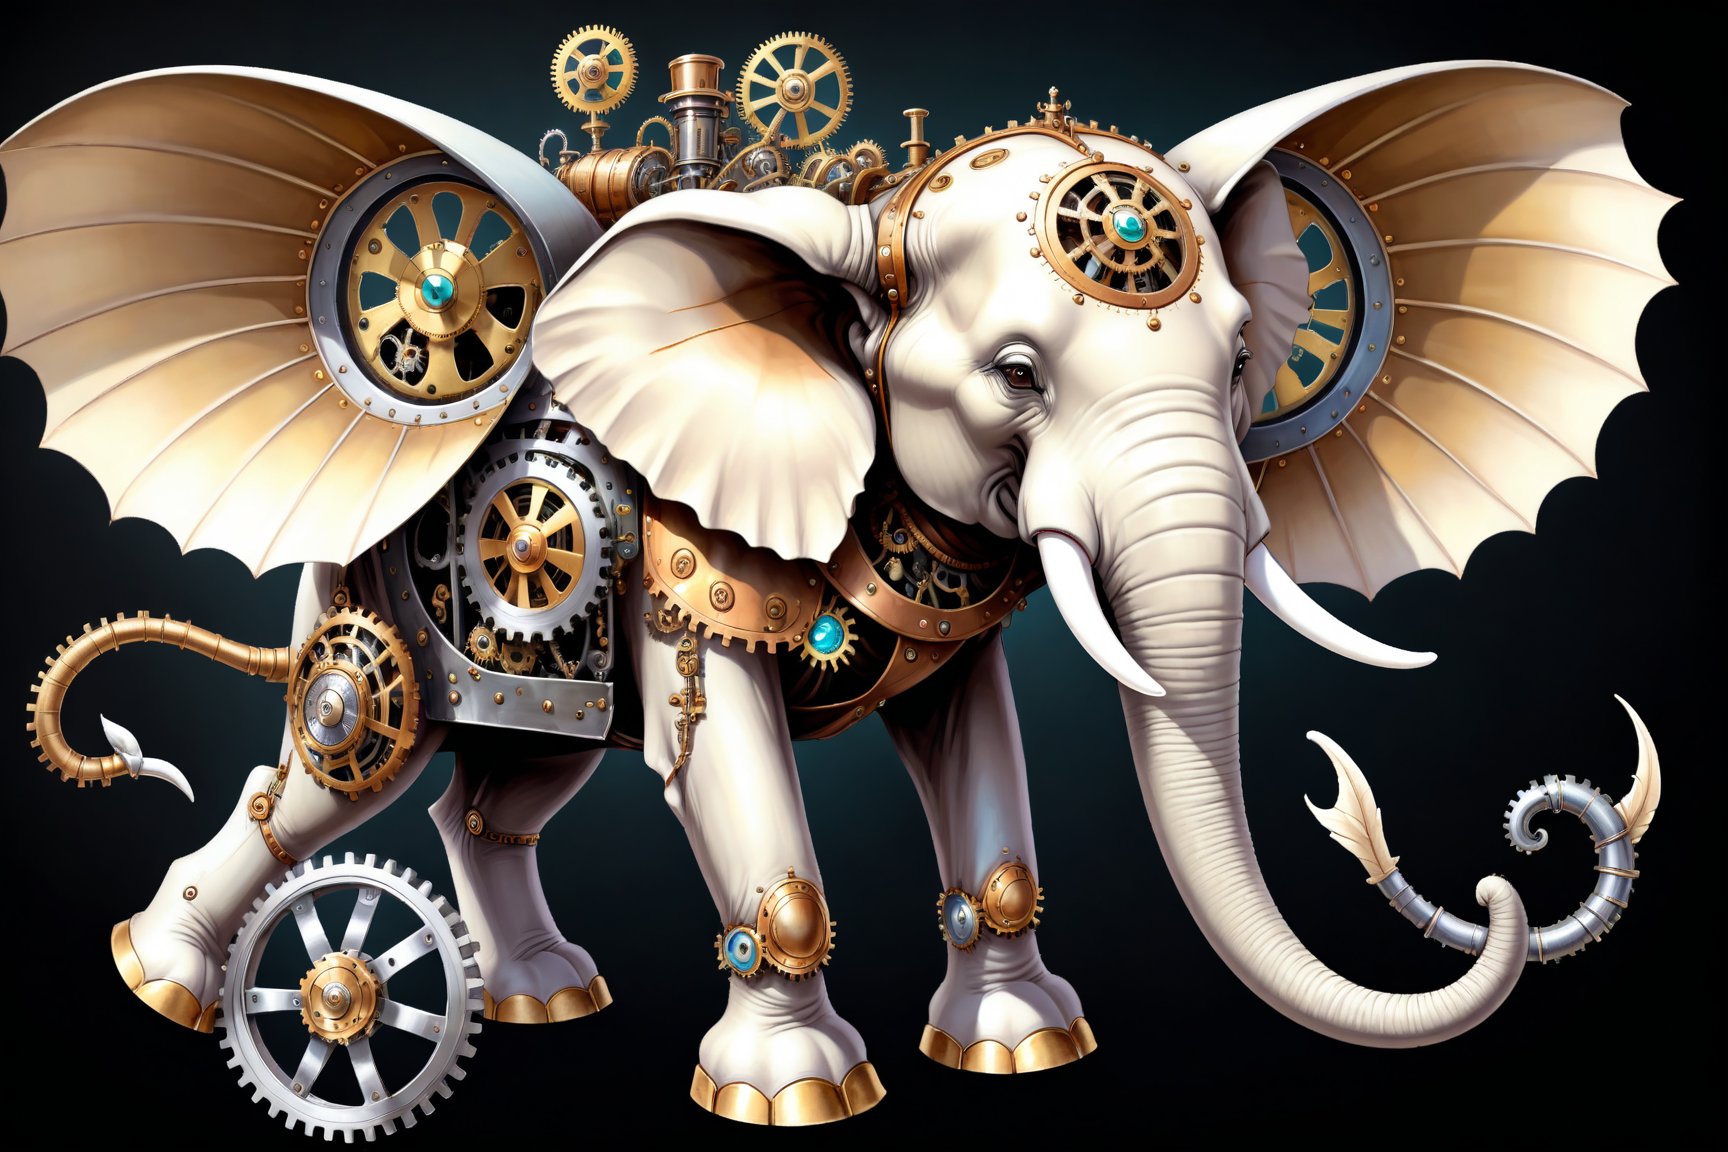 Generates a detailed steampunk style image with pastel colors and golden brown of a elephant with wing seen from above. The beetle must be adorned with intricate gears and mechanical elements that imitate its natural structure. The image must be high resolution and show a perfect fusion between the organic and the mechanical, black background,DonMSt34mPXL,steampunk,steampunk style